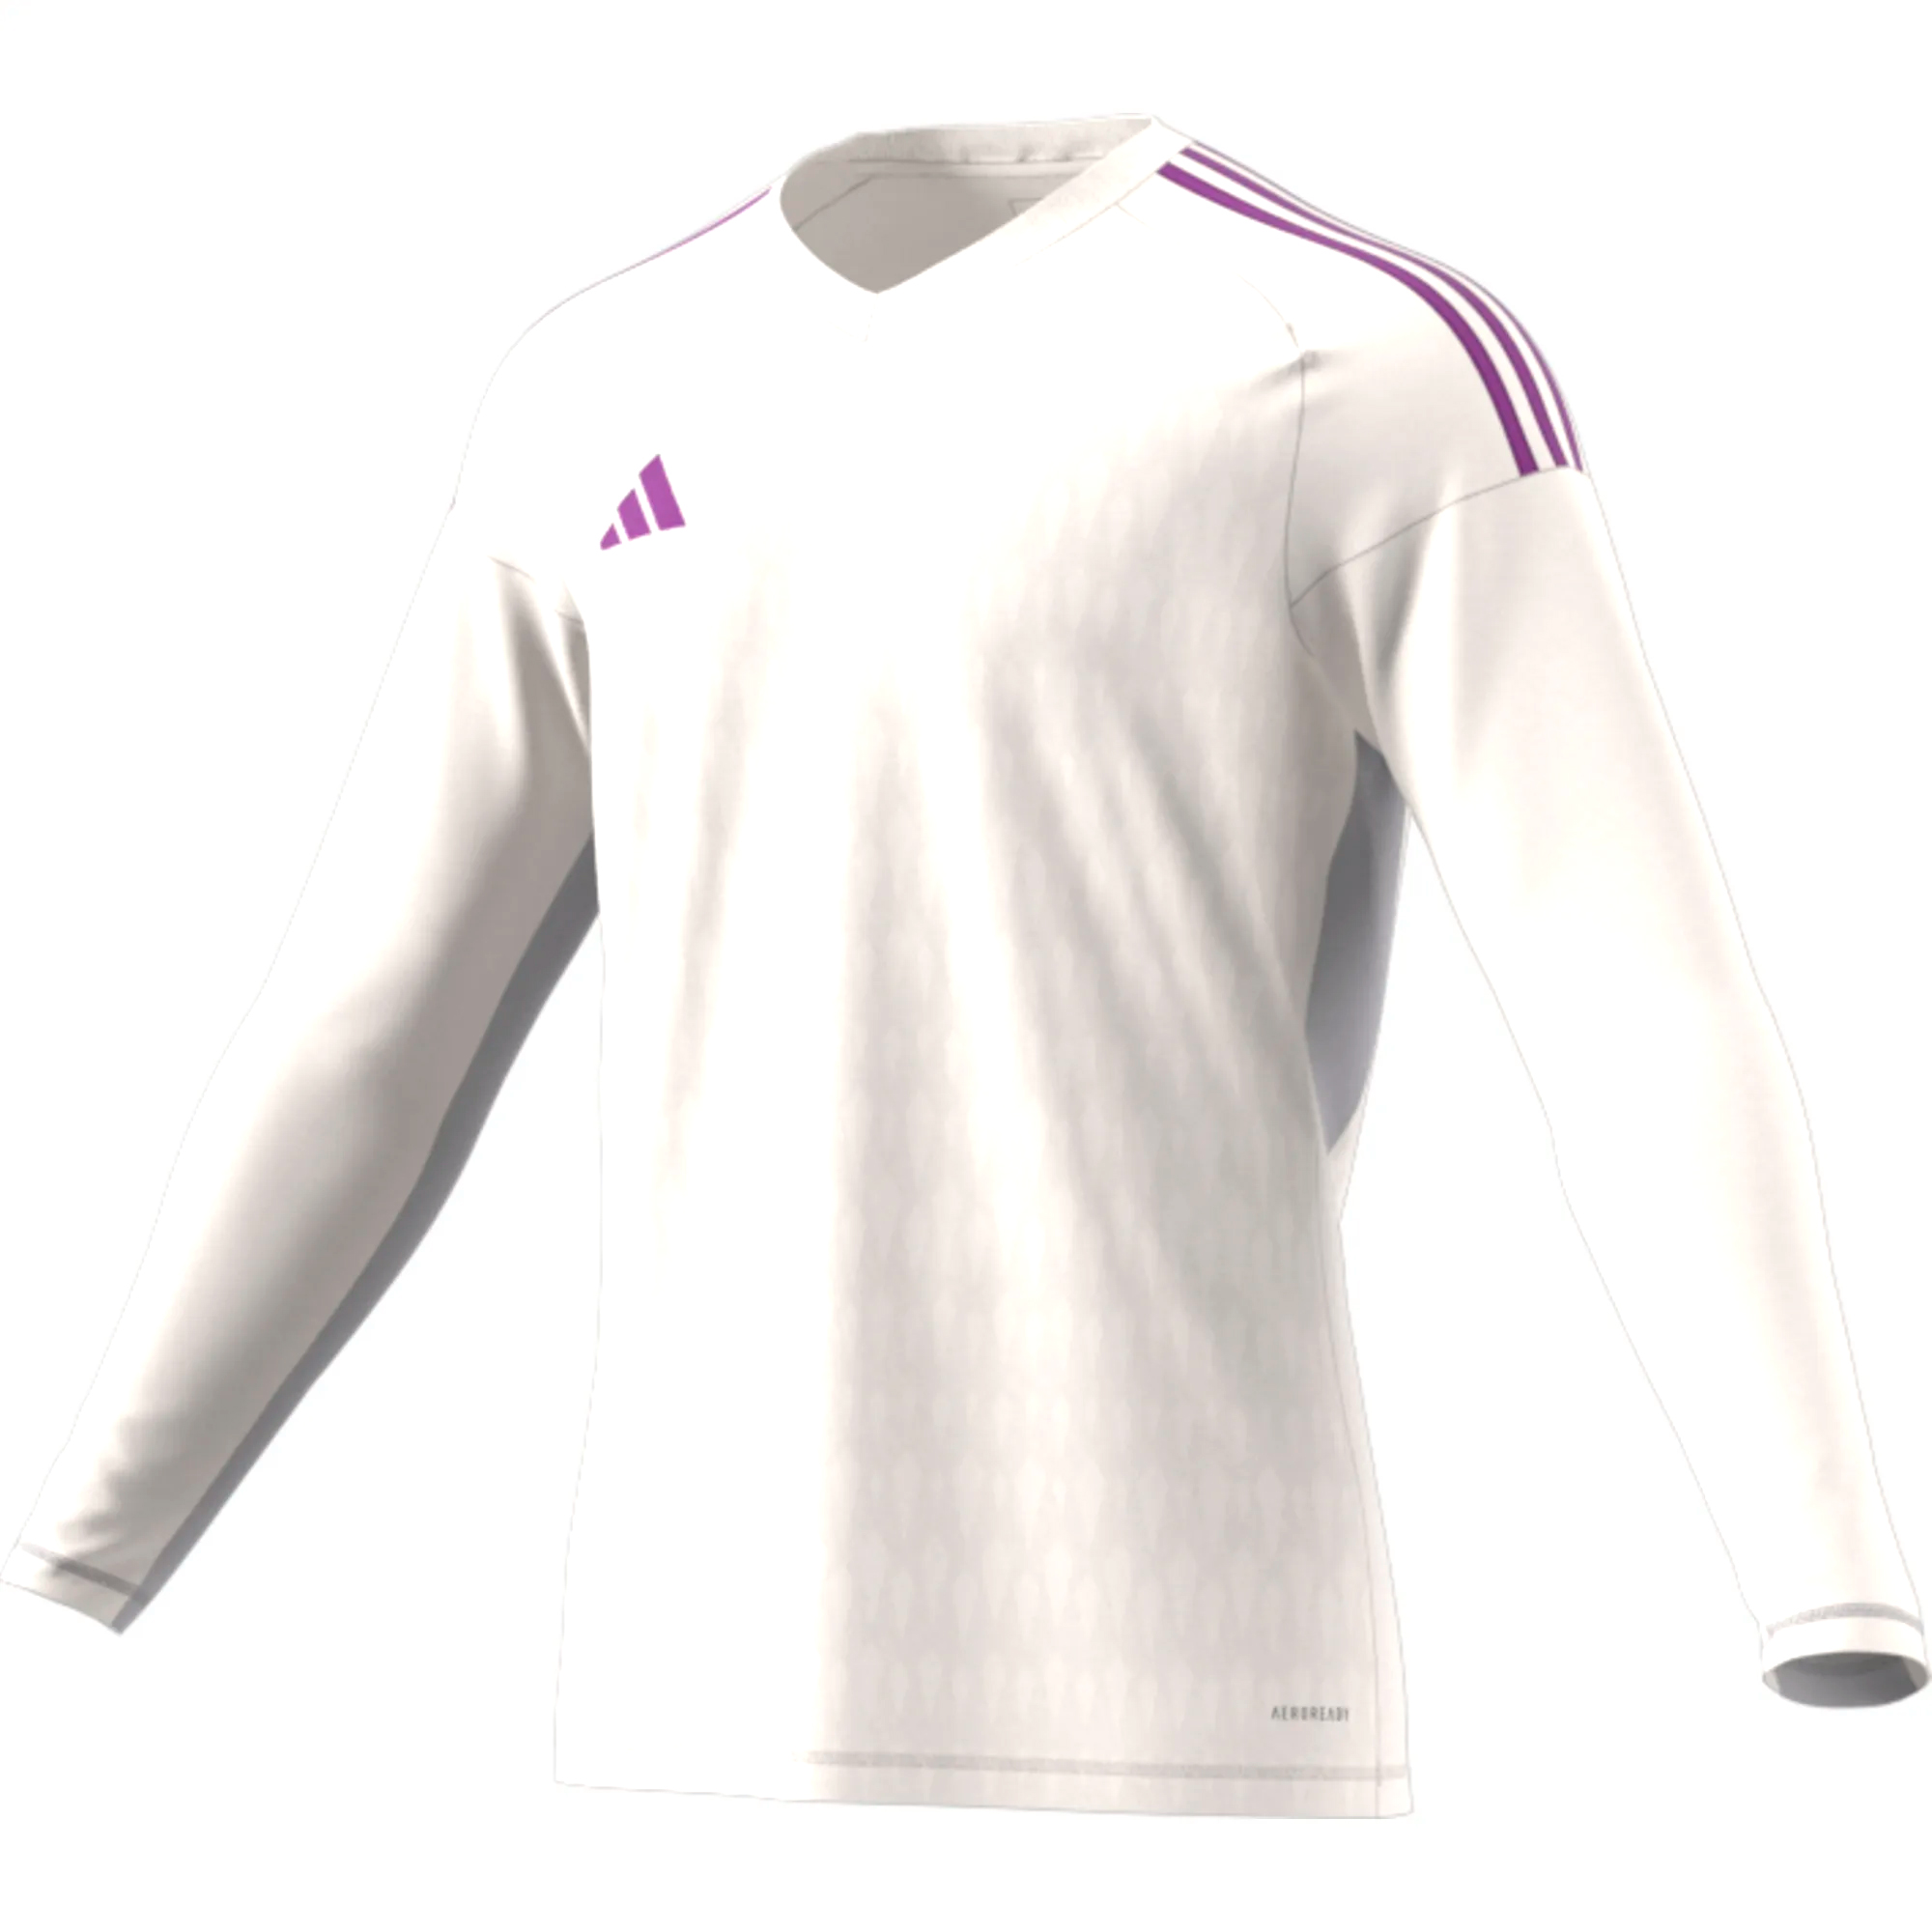 ADIDAS T23 COMPETITION GK JERSEY LS CORE WHITE